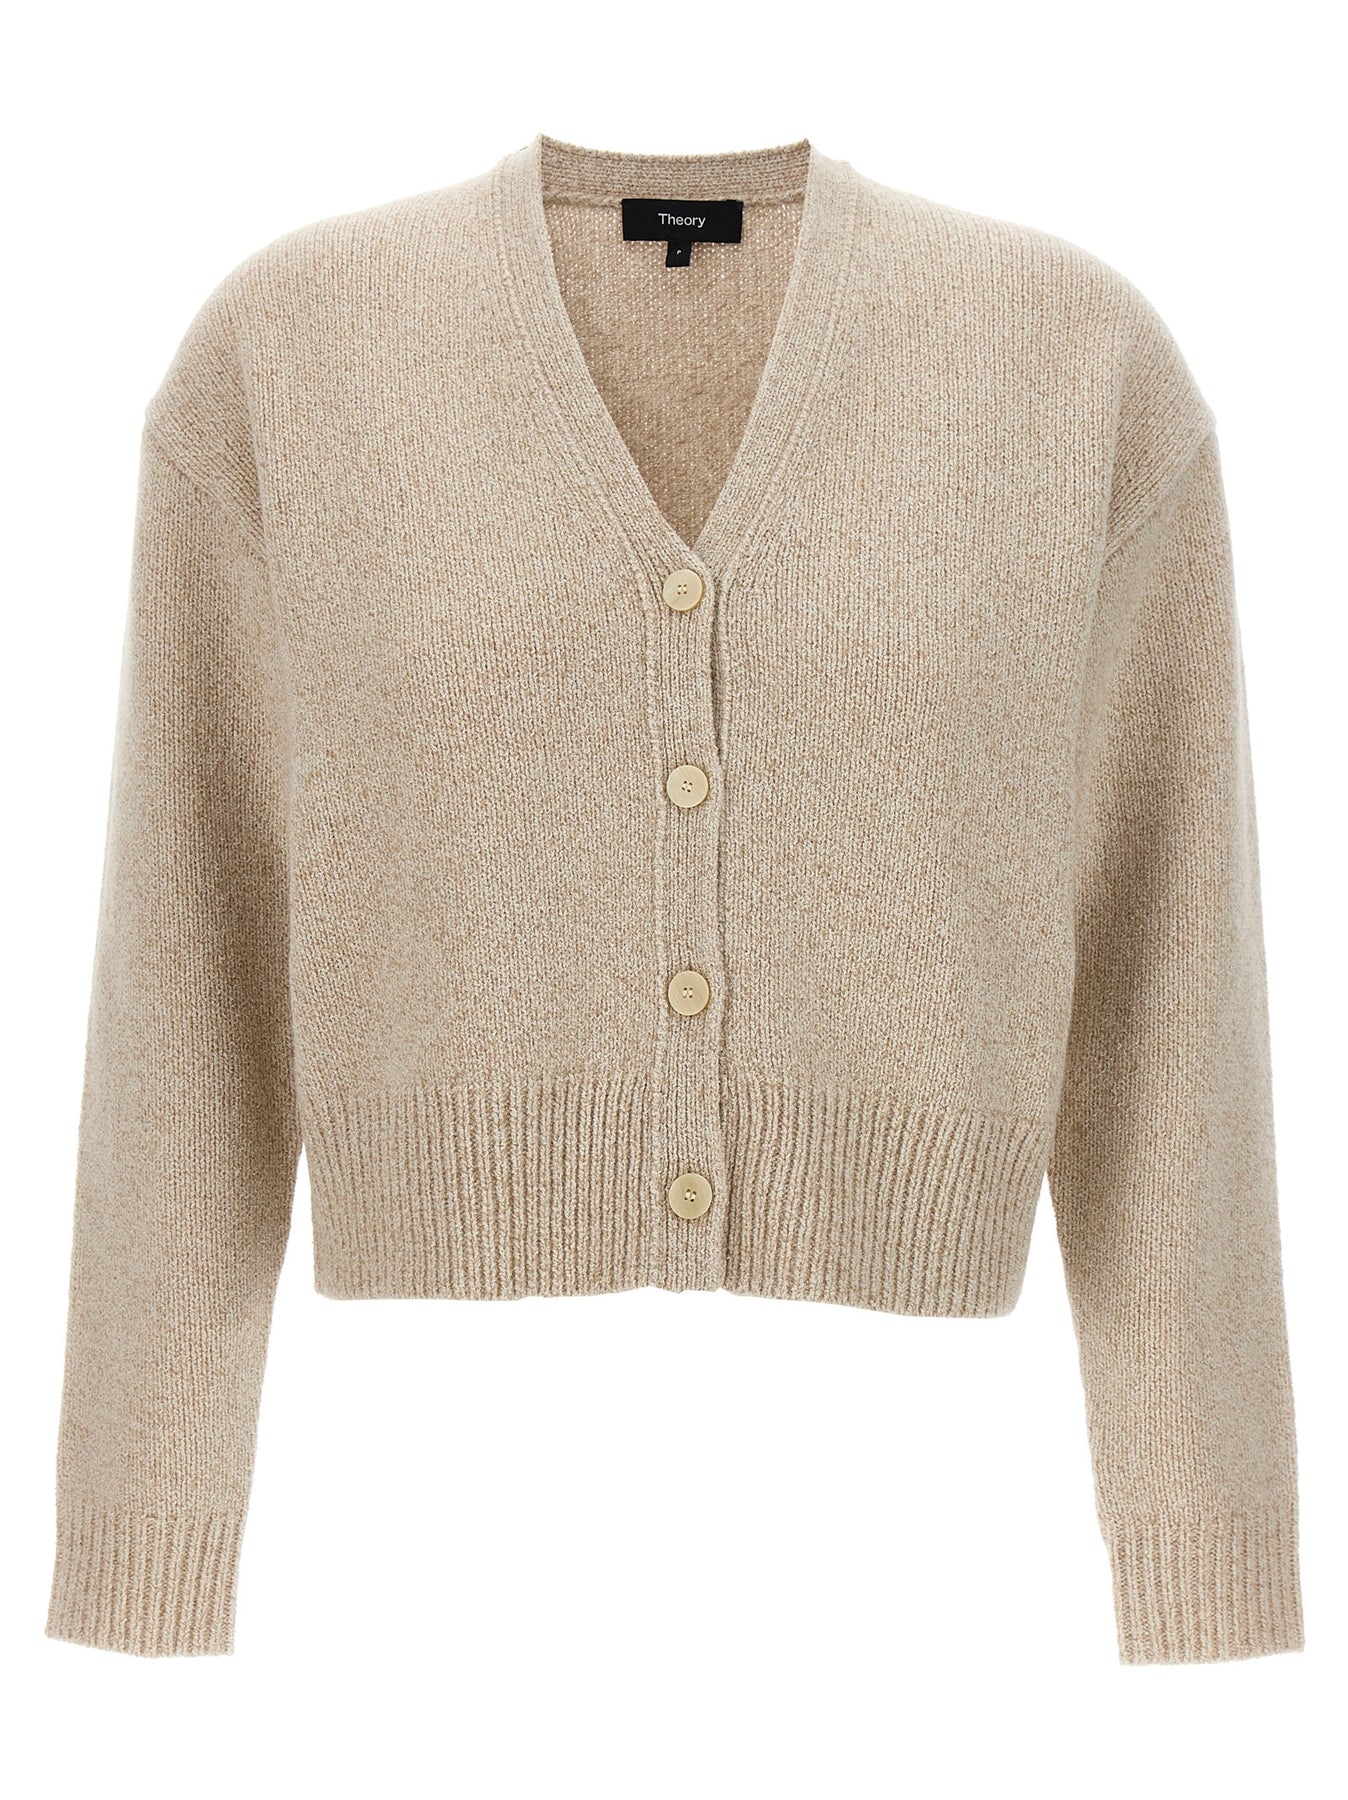 THEORY CROPPED CARDIGAN SWEATER, CARDIGANS BEIGE